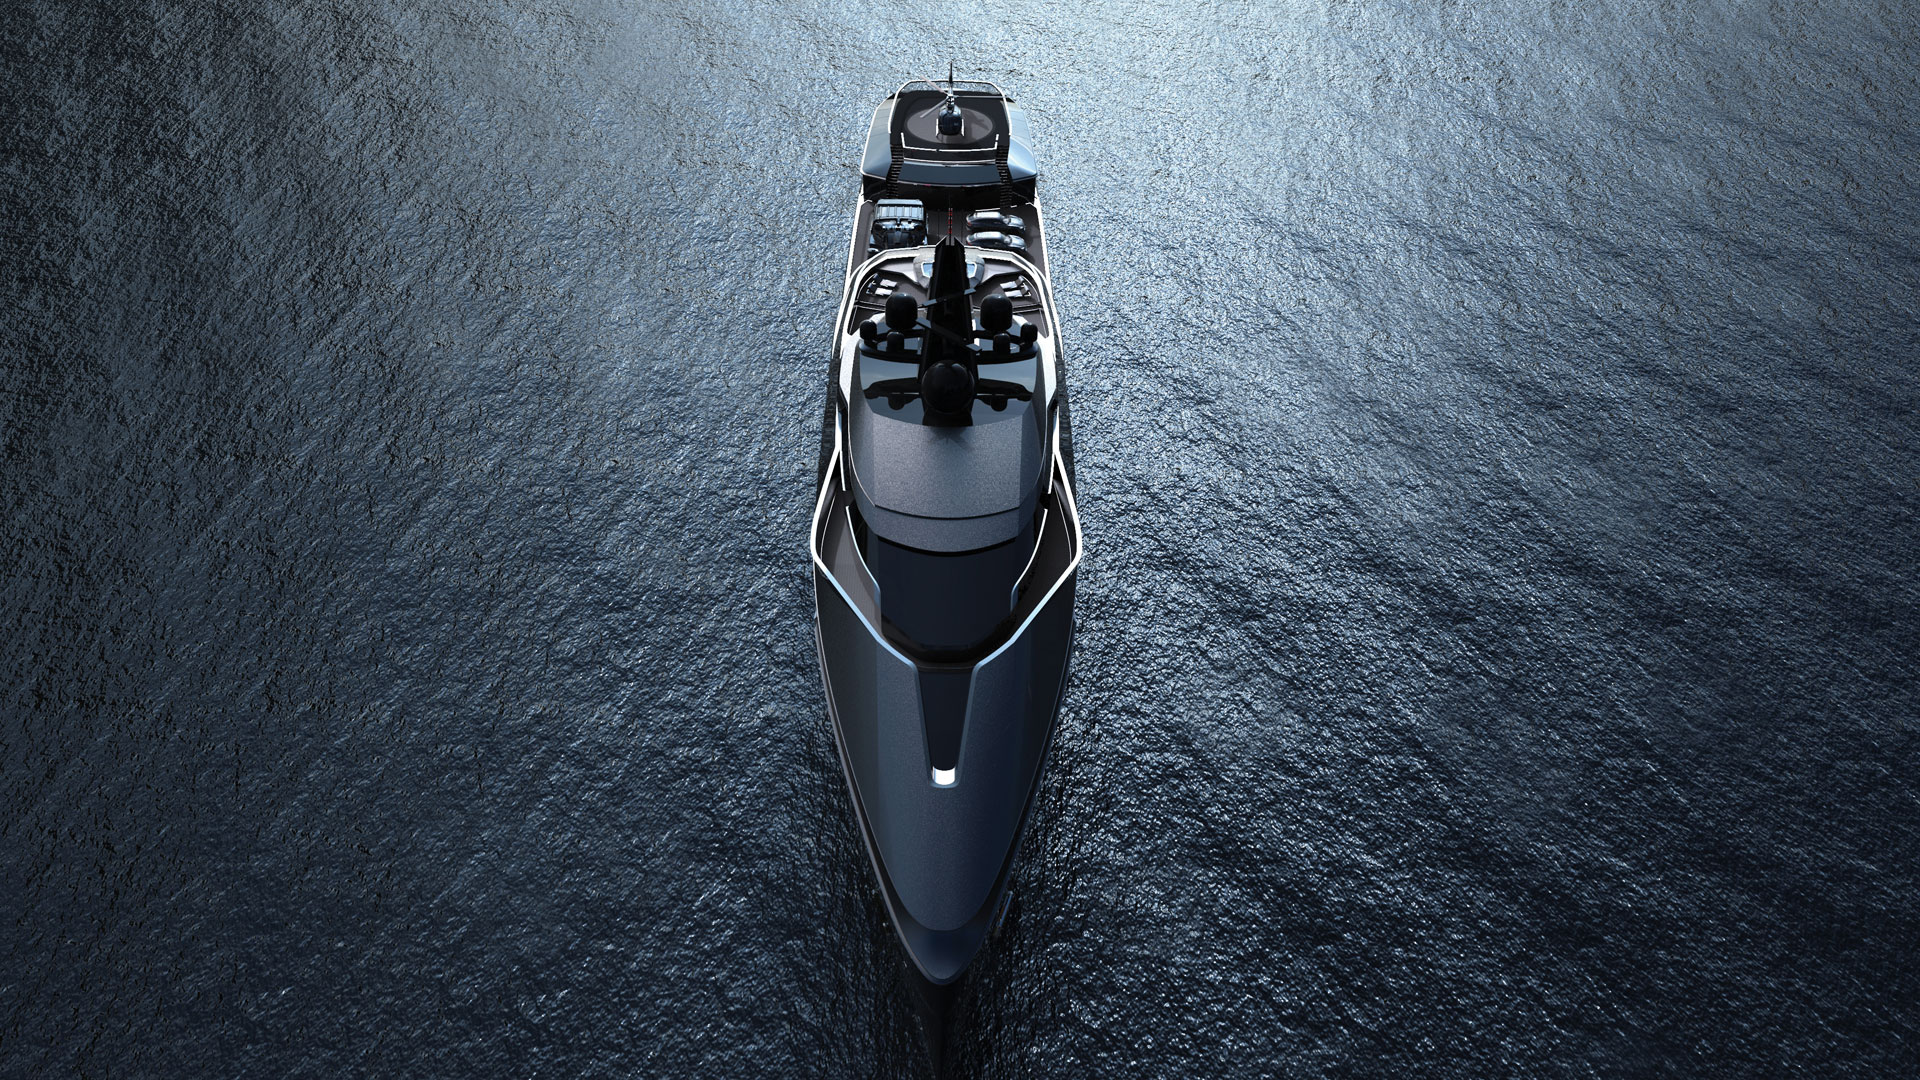 The Coolest Super Yacht From The Dubai International Boat Show